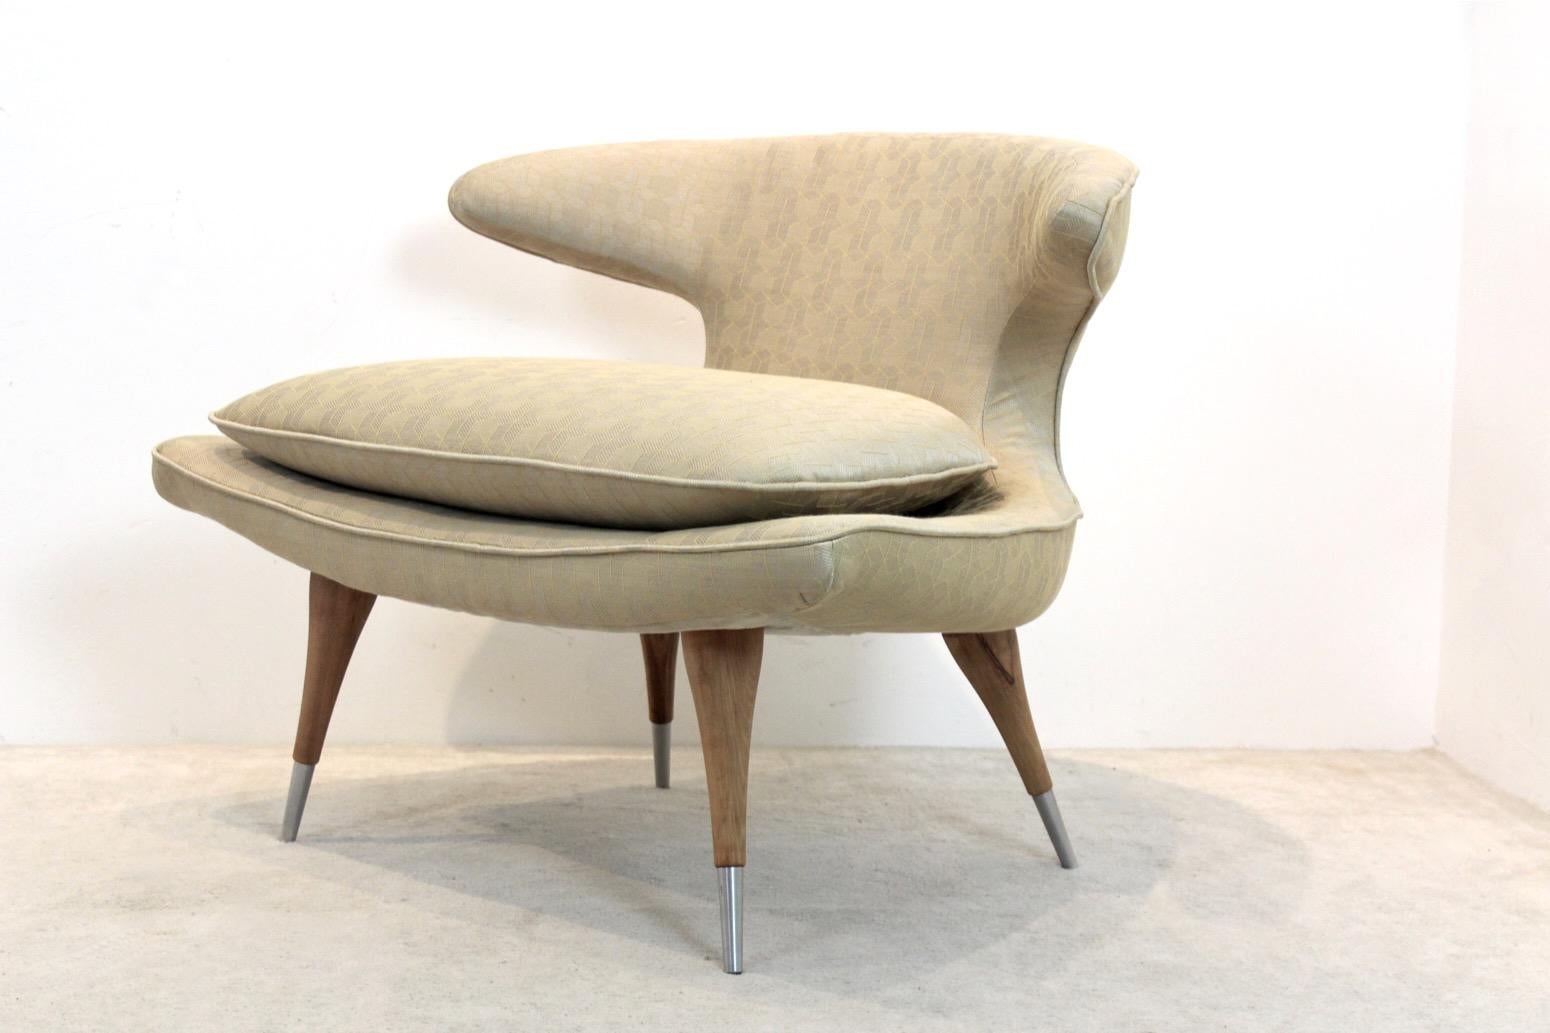 Exclusive Karpen of California ‘Horn Chair’ in excellent condition. Newly upholstered in a goldish upholstery with geometrical pattern, walnut legs with aluminum sabots. This chair is considered one of California’s iconic chair designs of the